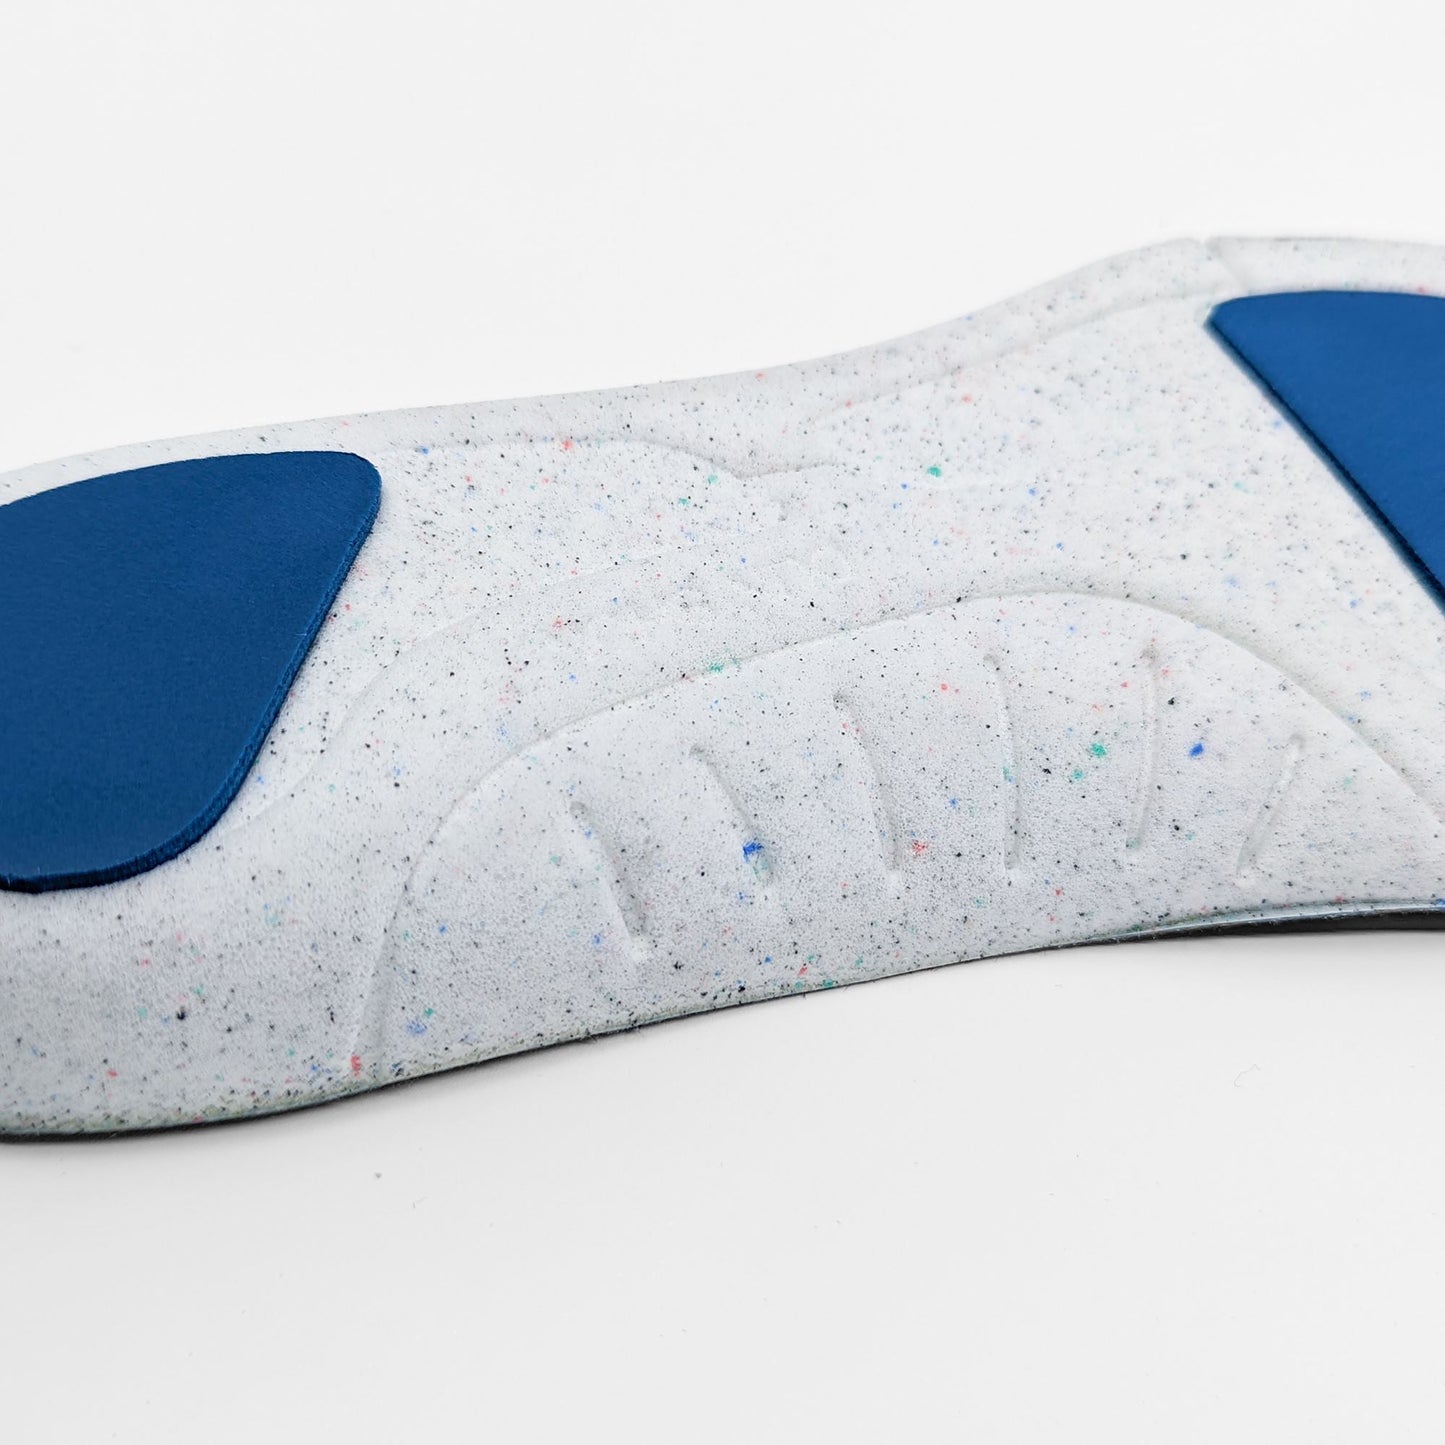 Photo of the recyclable, custom removable insole.